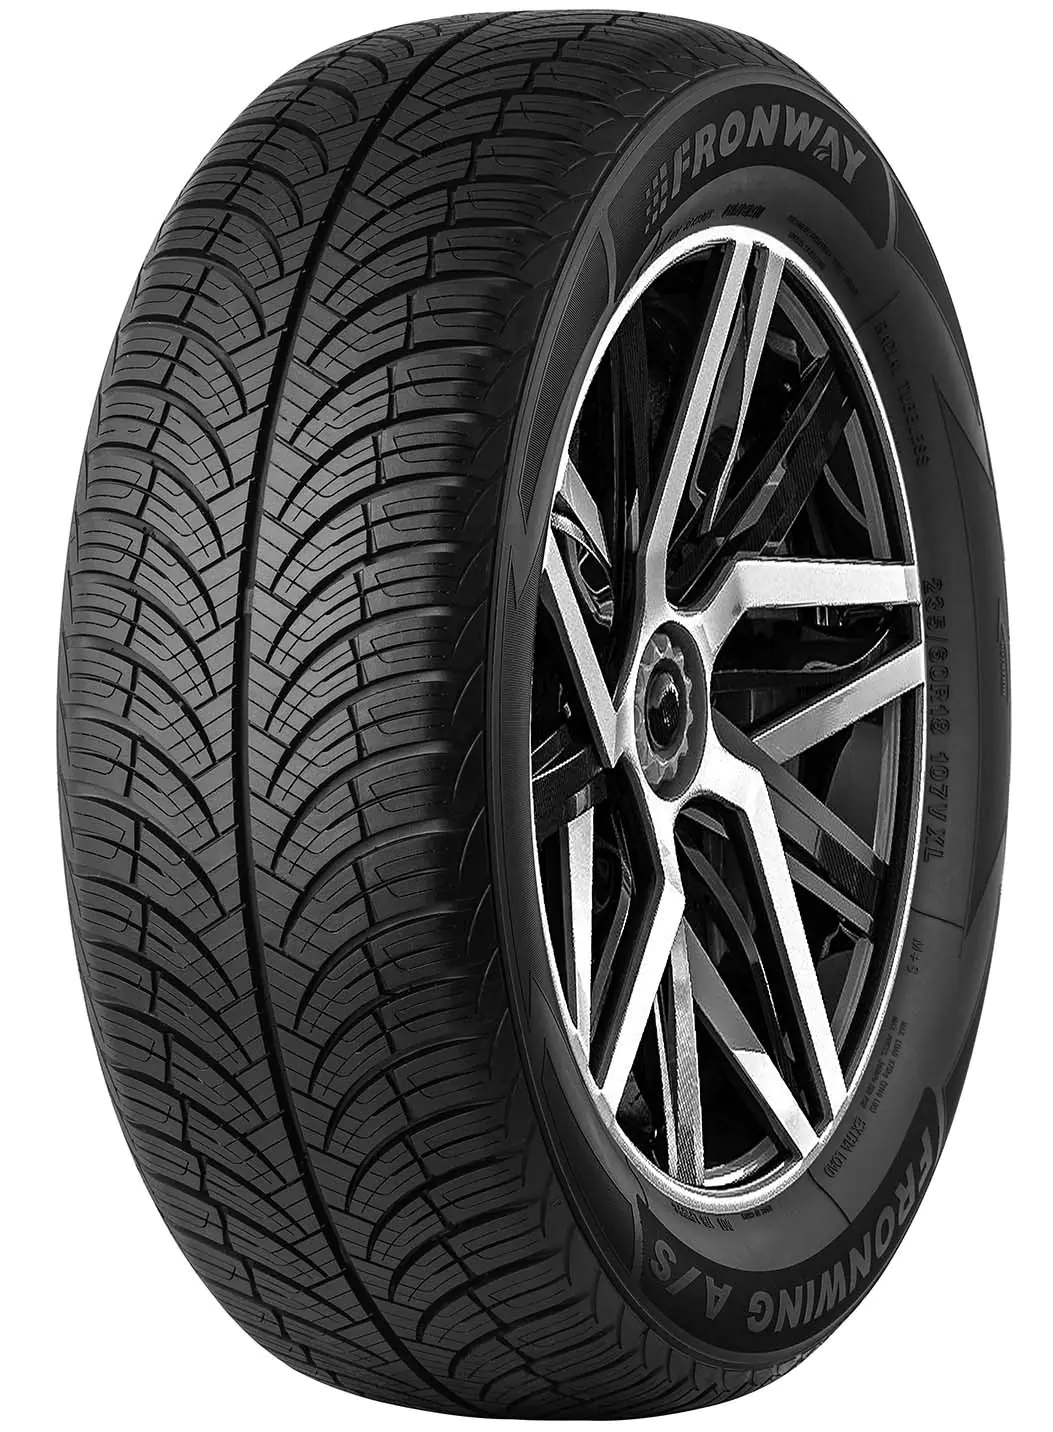 Fronway Fronway 195/55 R15 85H FRONWING A/S pneumatici nuovi All Season 